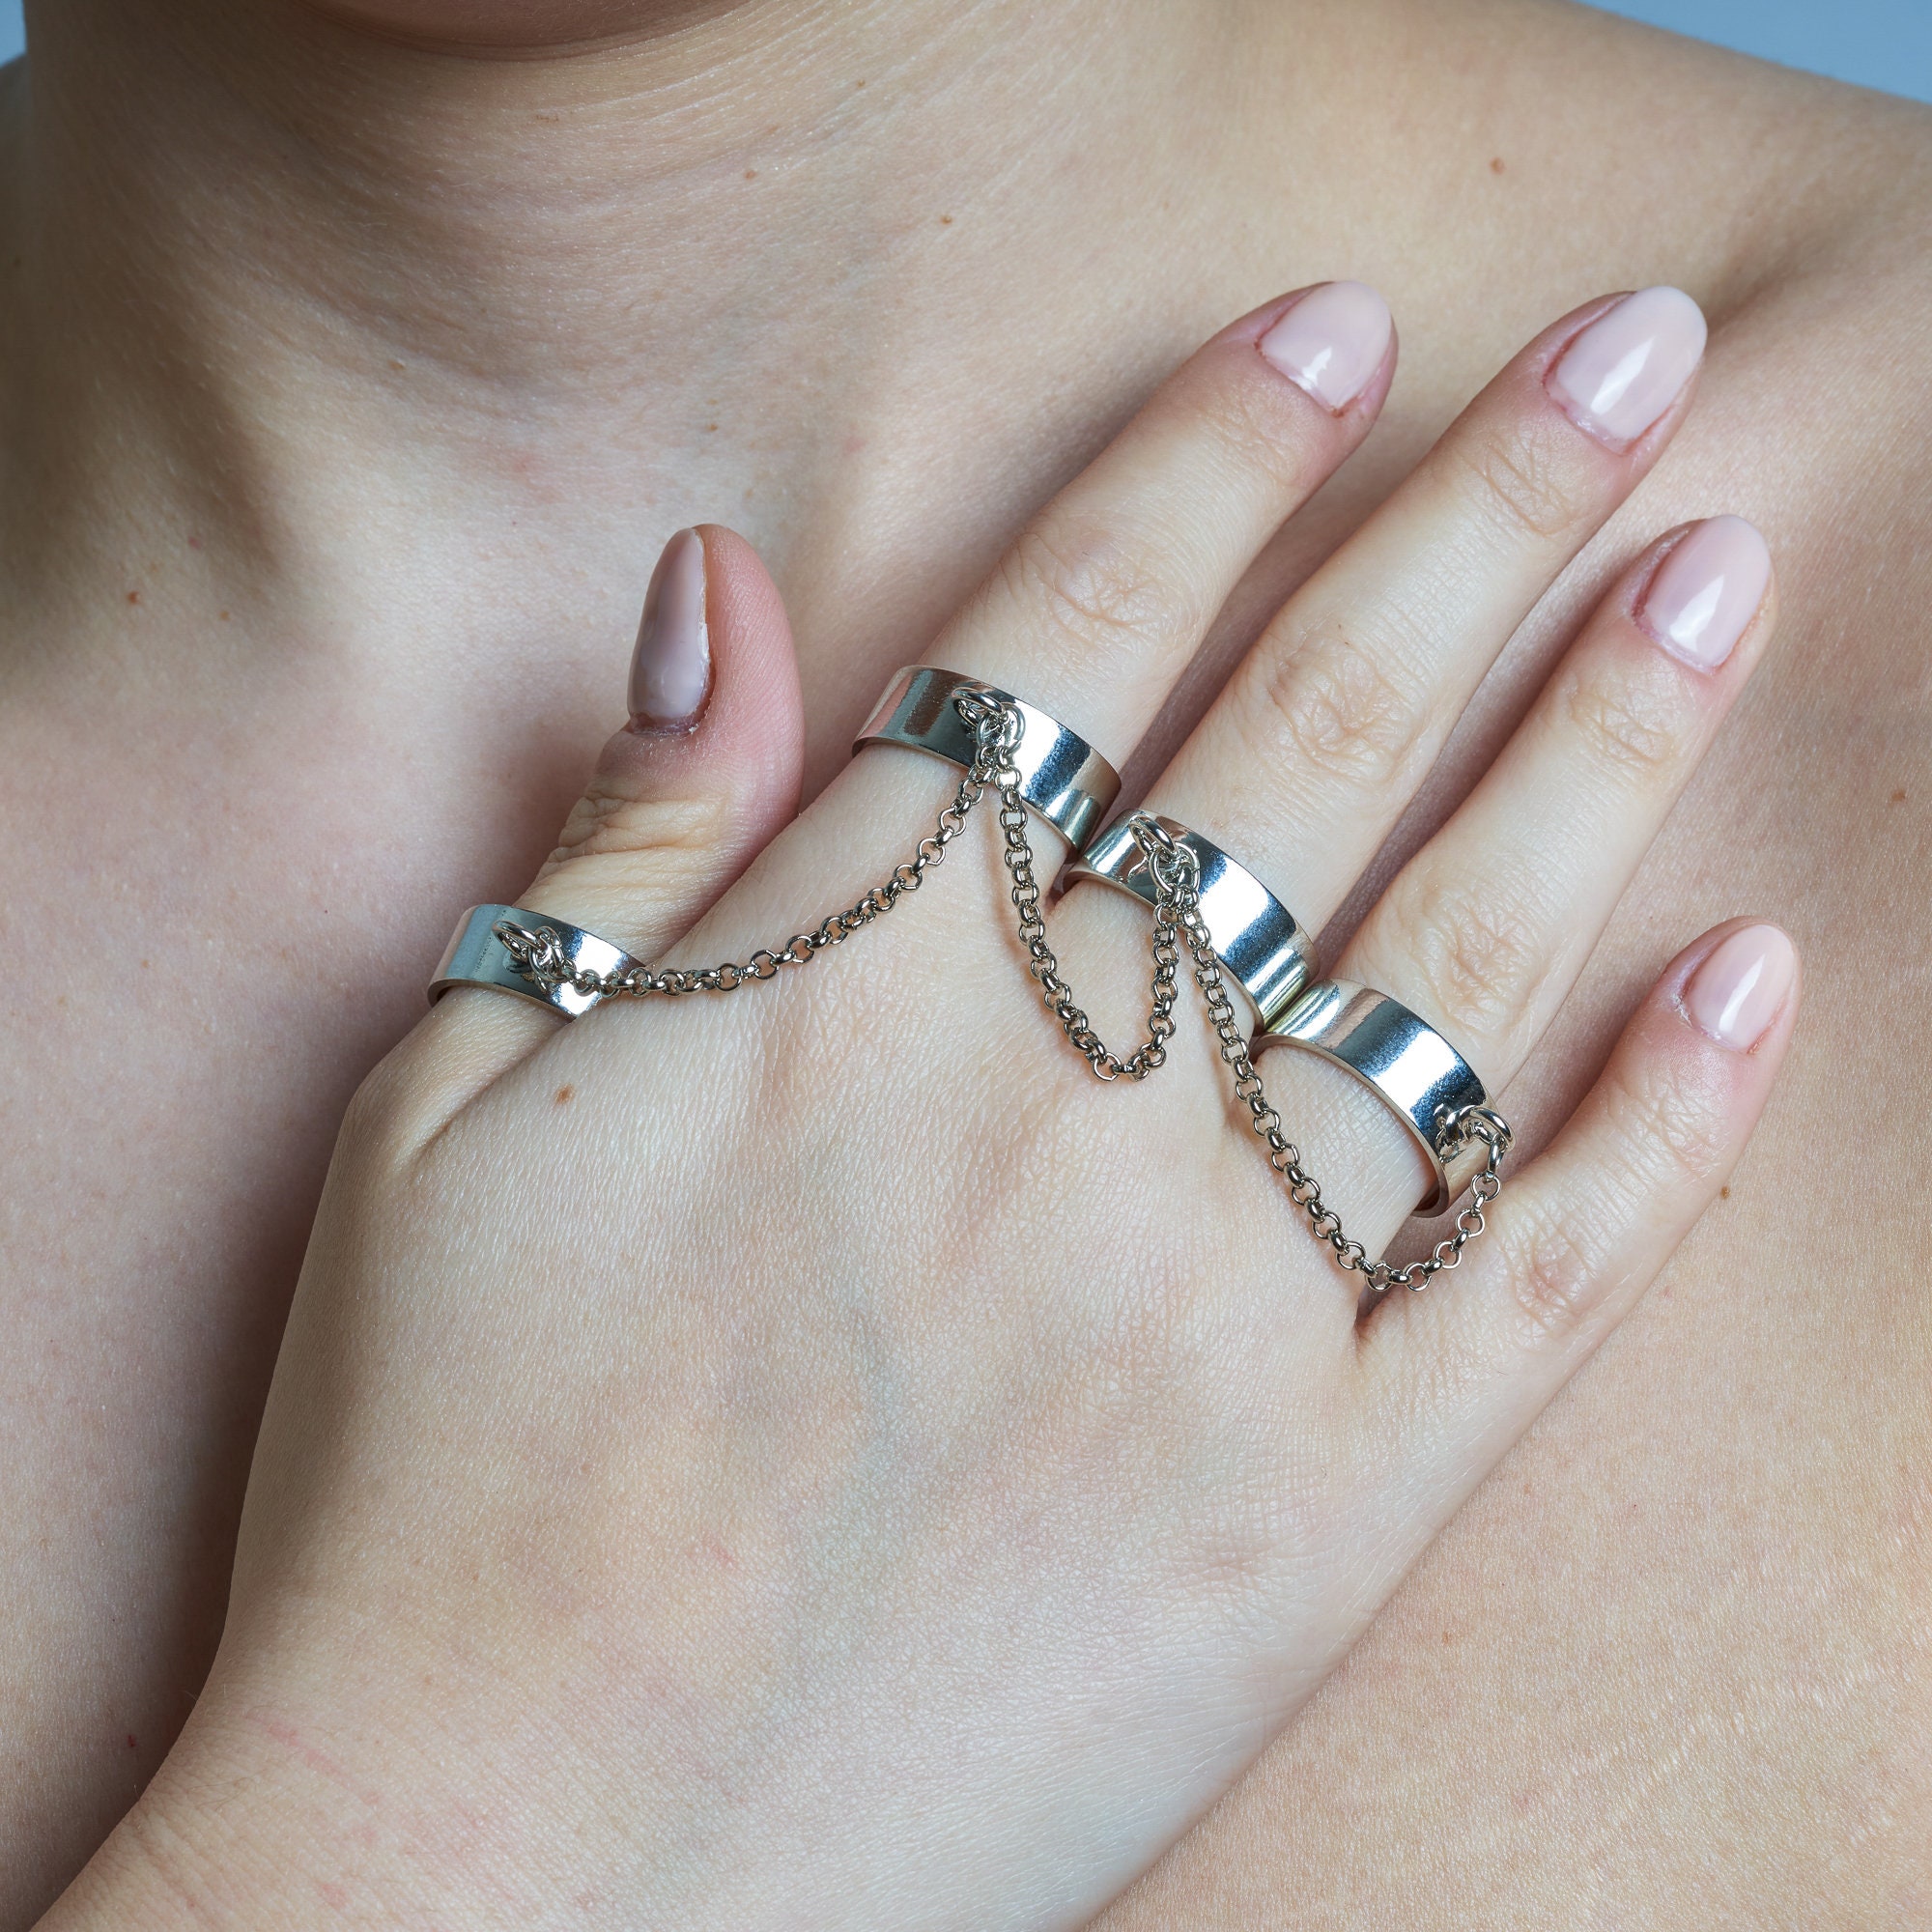 4 Chain Rings Punk Style Minimalist Smooth Chain Ring